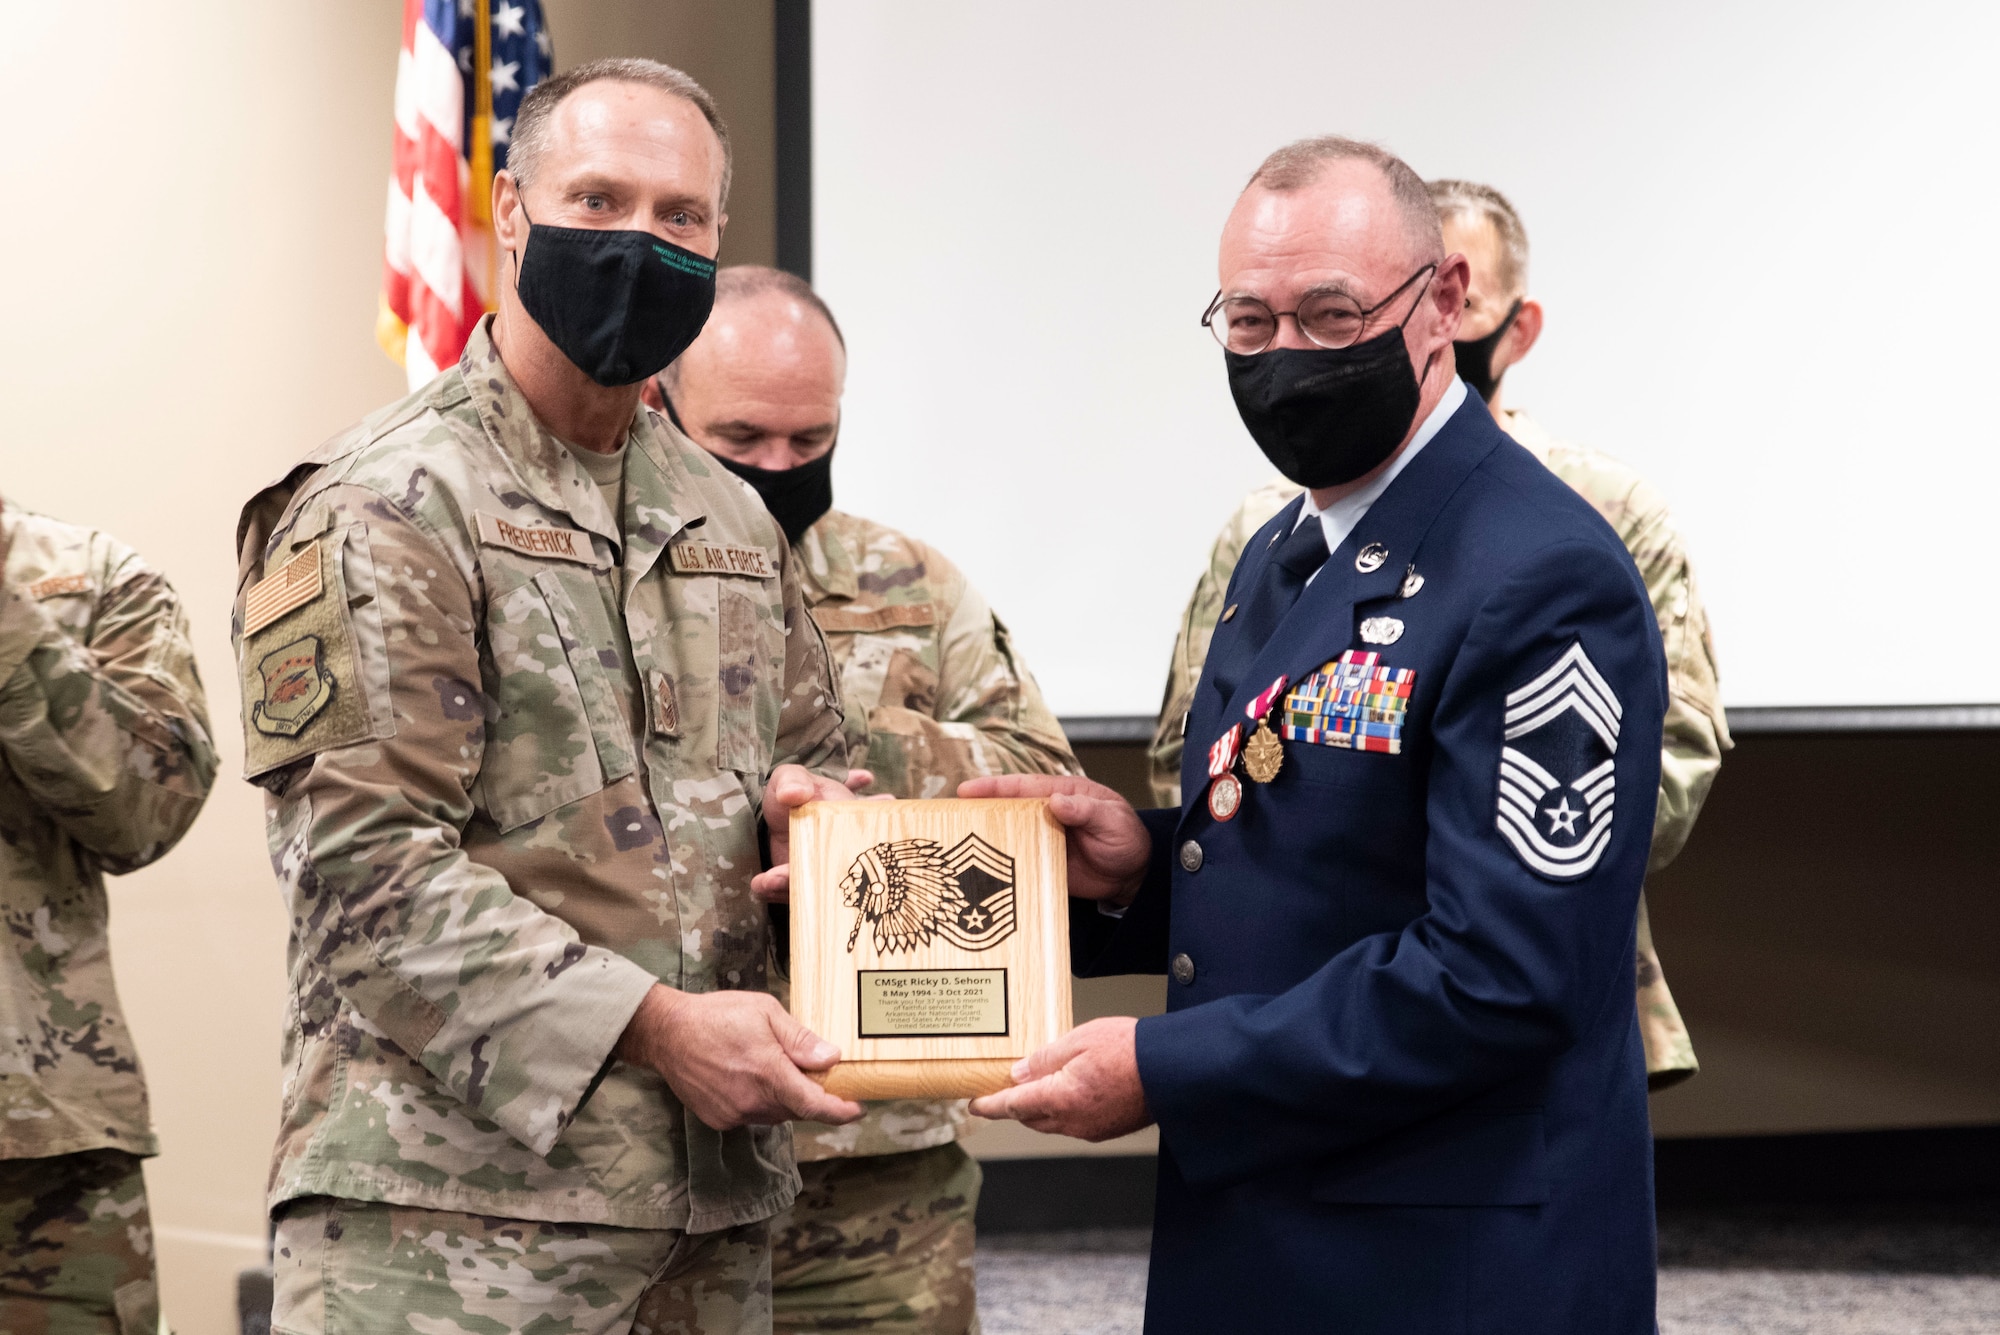 The 188th Chiefs Council presents a plaque for Chief Master Sgt. Rocky D. Sehorn at his retirement ceremony, held on September, 11, 2021, at Ebbing Air National Guard Base, AR. Sehorn’s career spanned more than 36 years in the United States armed forces including the Army and Air National Guard.